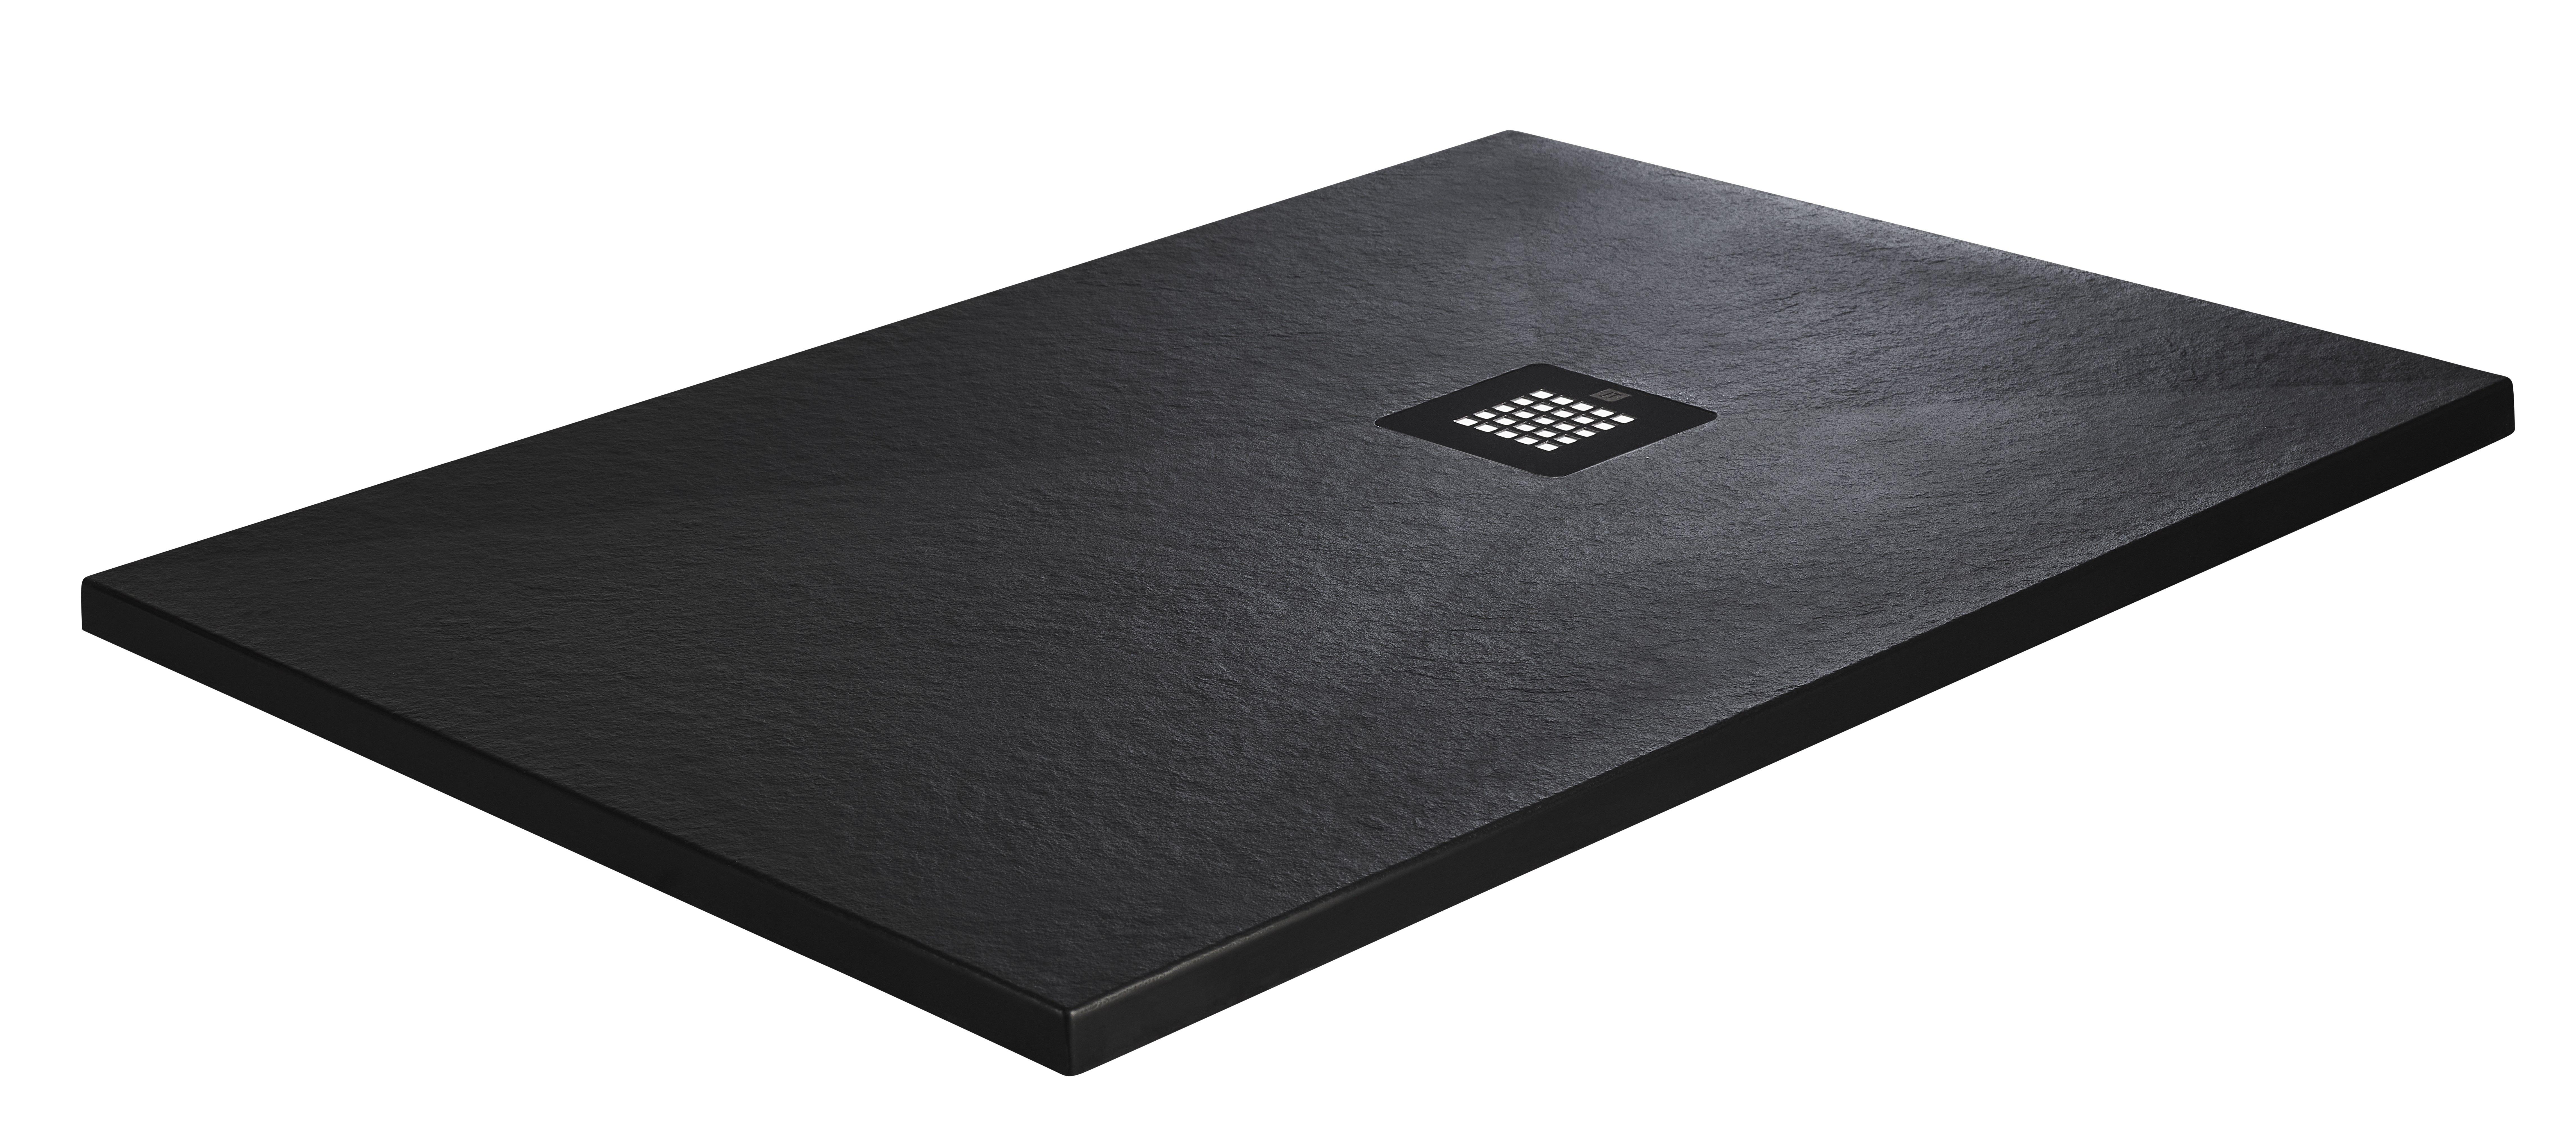 Just Trays Natural Flat to Floor Quadrant Shower Tray 800mm Haworth Matt Black (Only Image Currently Available) [NTL80Q010]